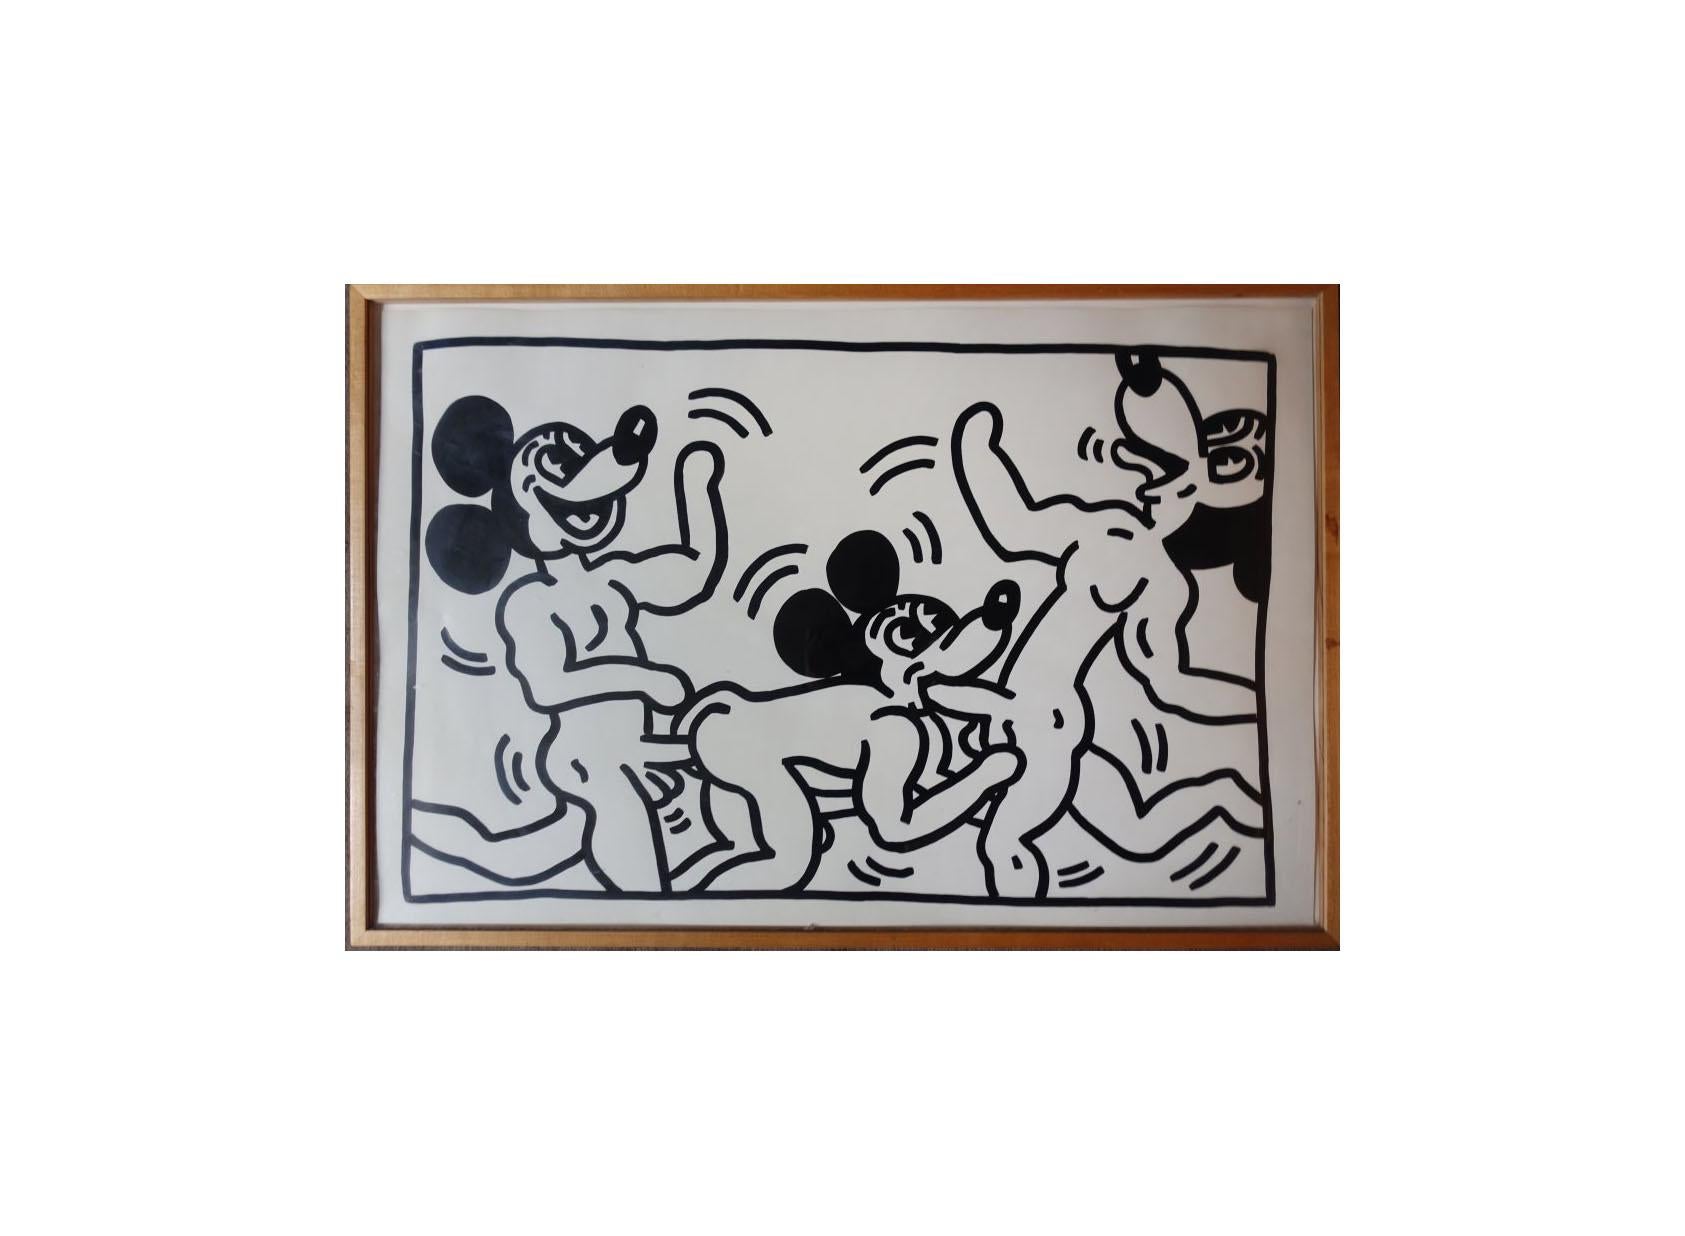 Untitled (Mickey Mouse) - Art by Keith Haring